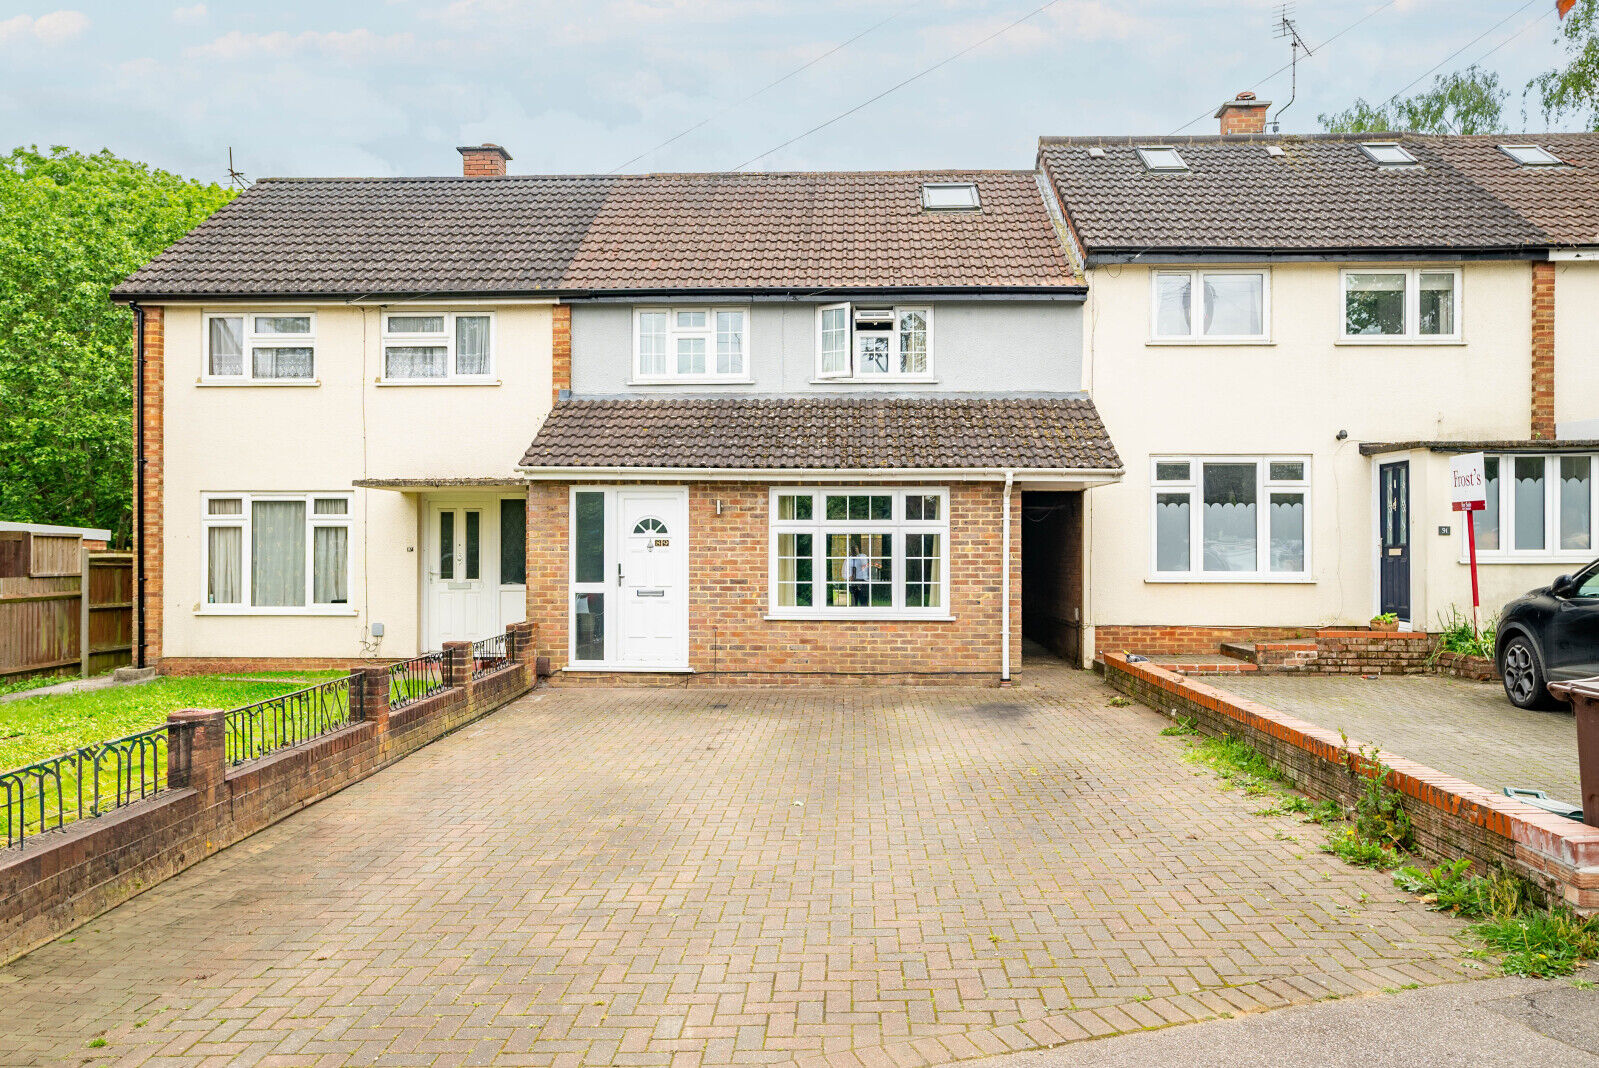 3 bedroom mid terraced house for sale Drakes Drive, St. Albans, AL1, main image